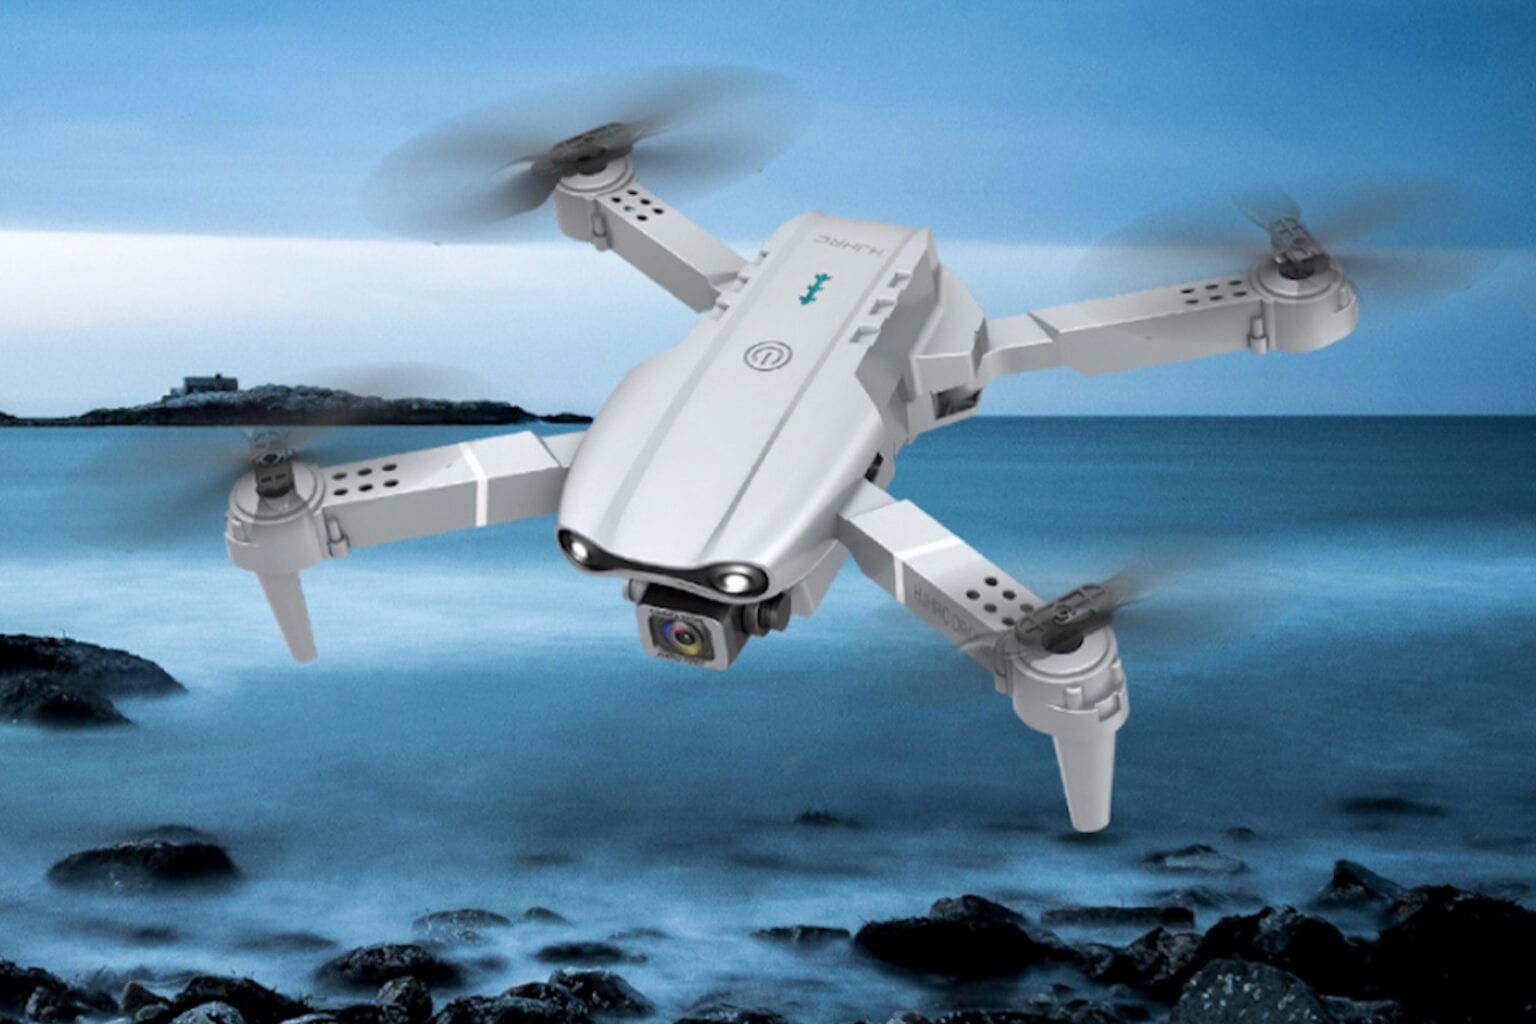 This double-drone deal is 56% off.